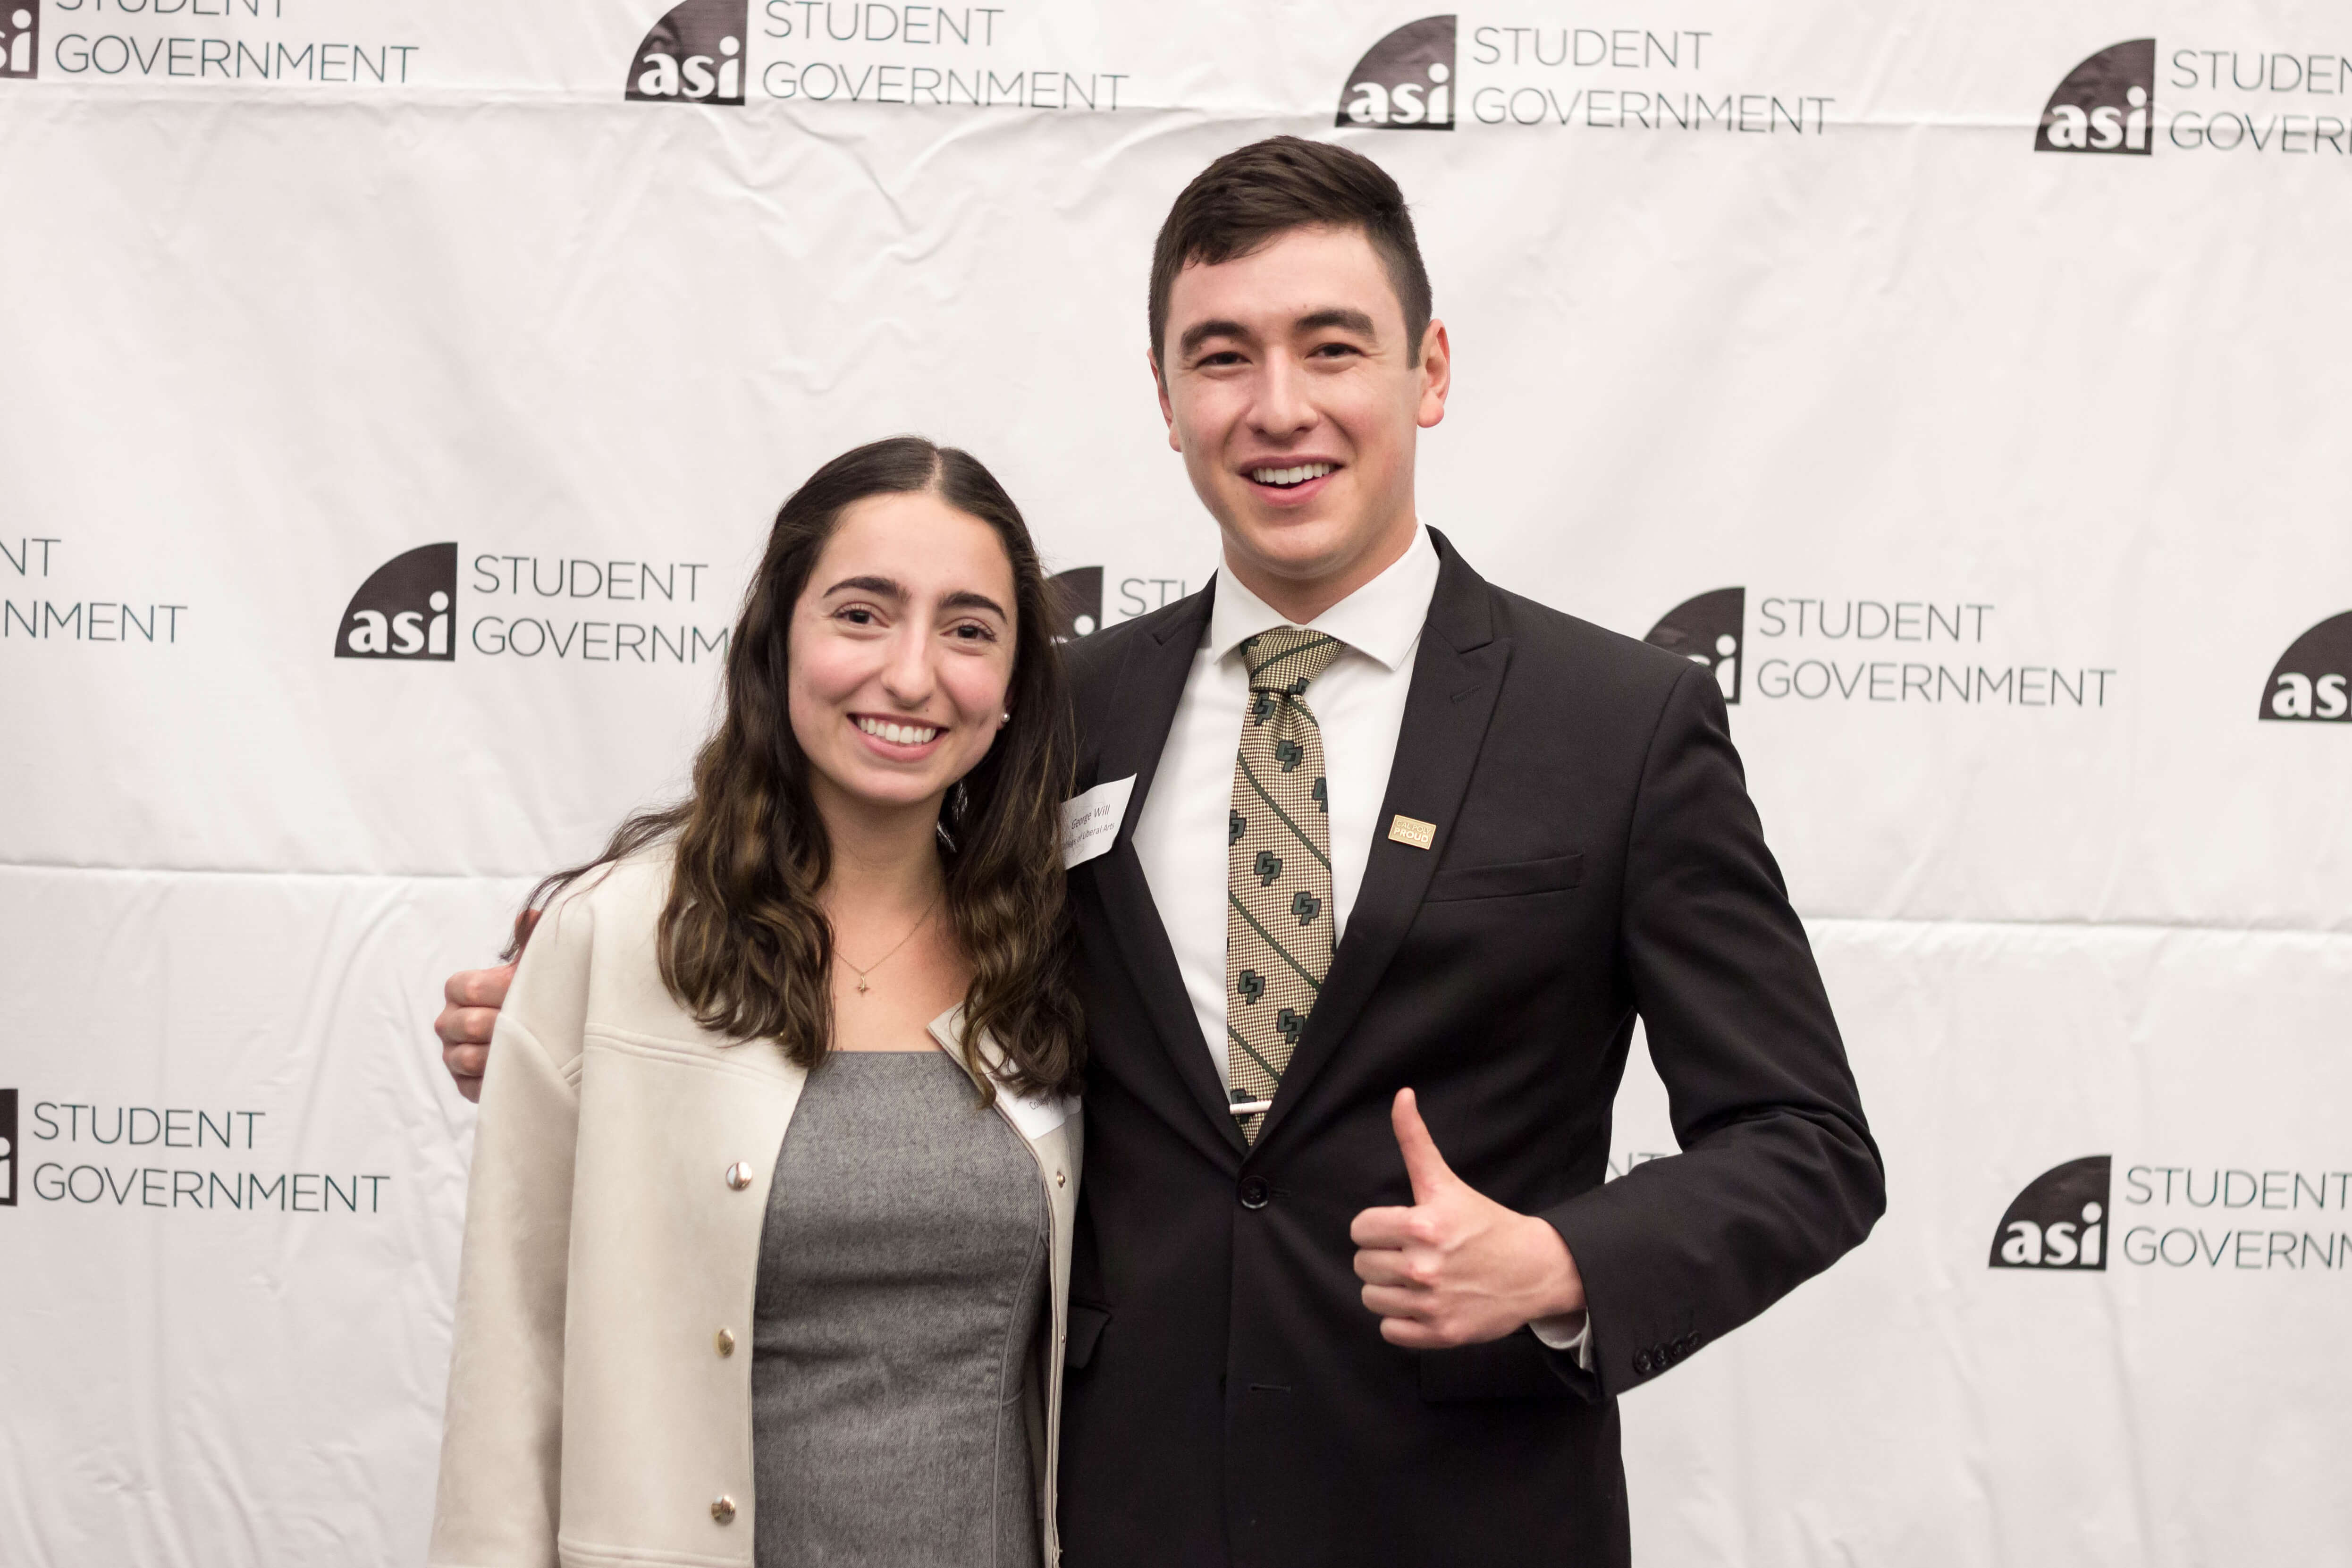 ASI presidential candidates Jasmin Fashami and George Will 